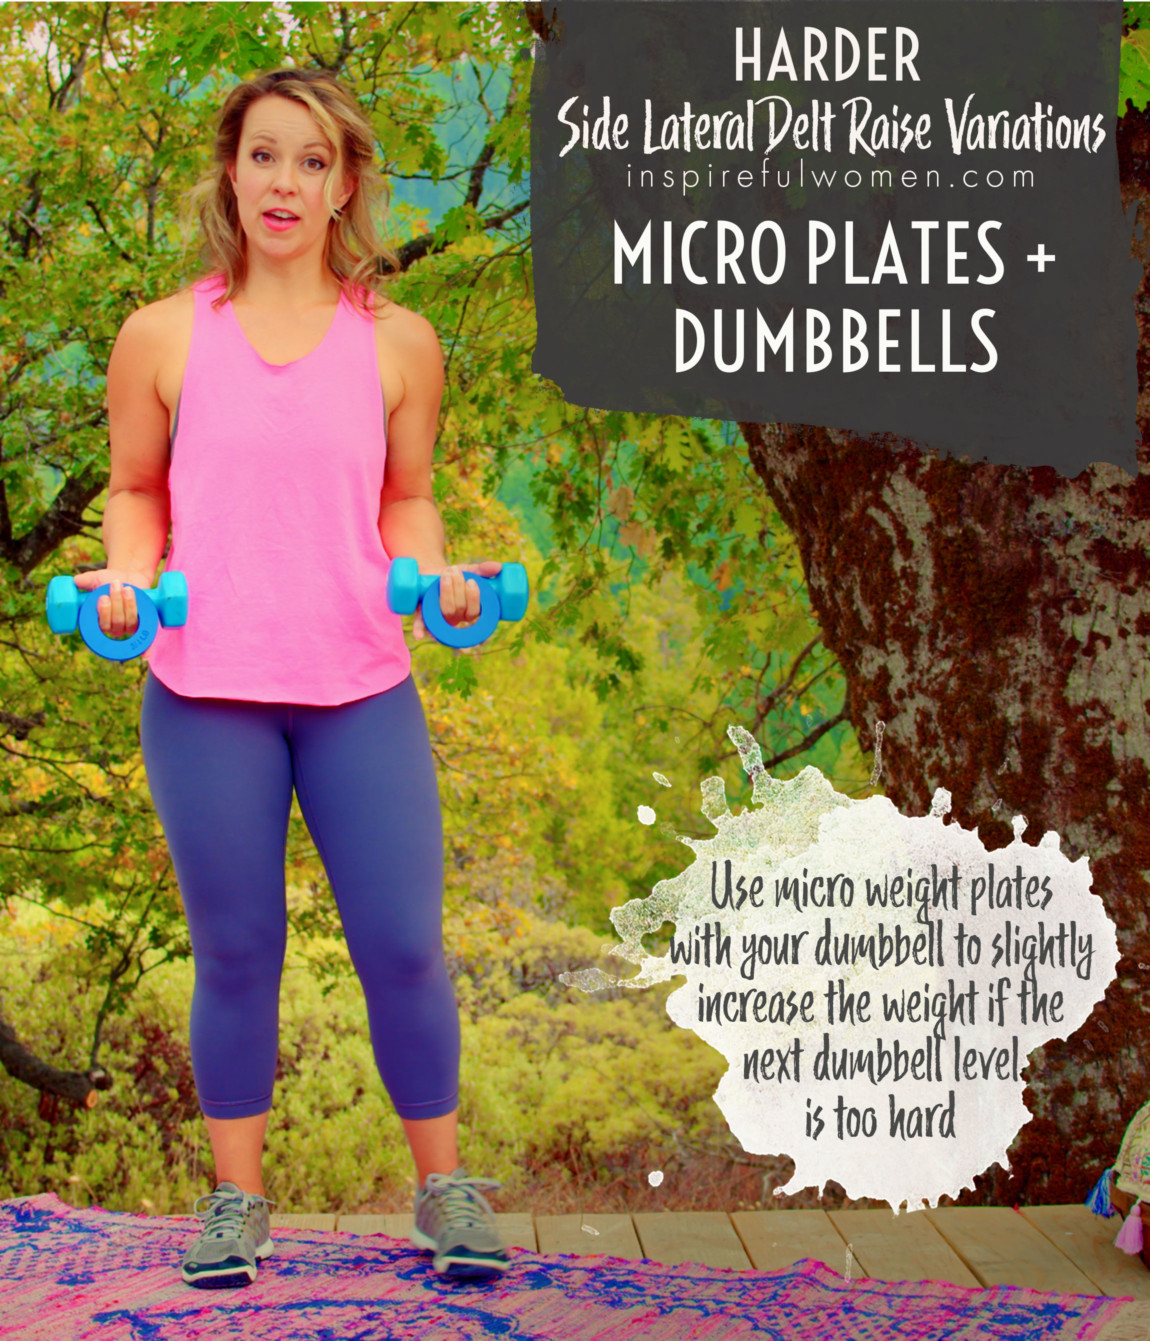 micro-weight-plates-db-dumbbells-side-lateral-raise-harder